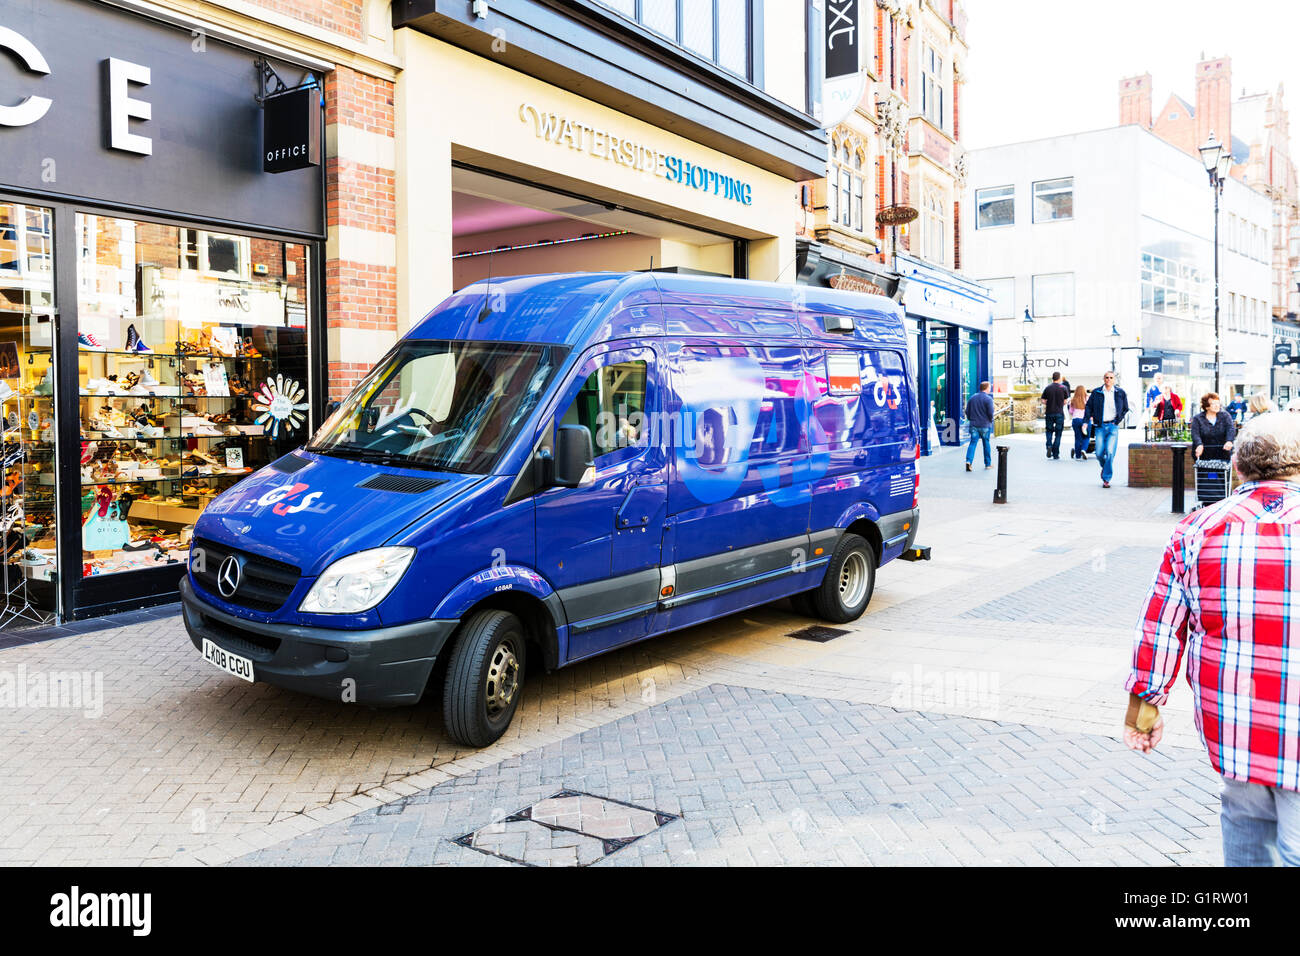 G4s group 4 security van vehicle parked collecting cash from shop money collection UK England Stock Photo